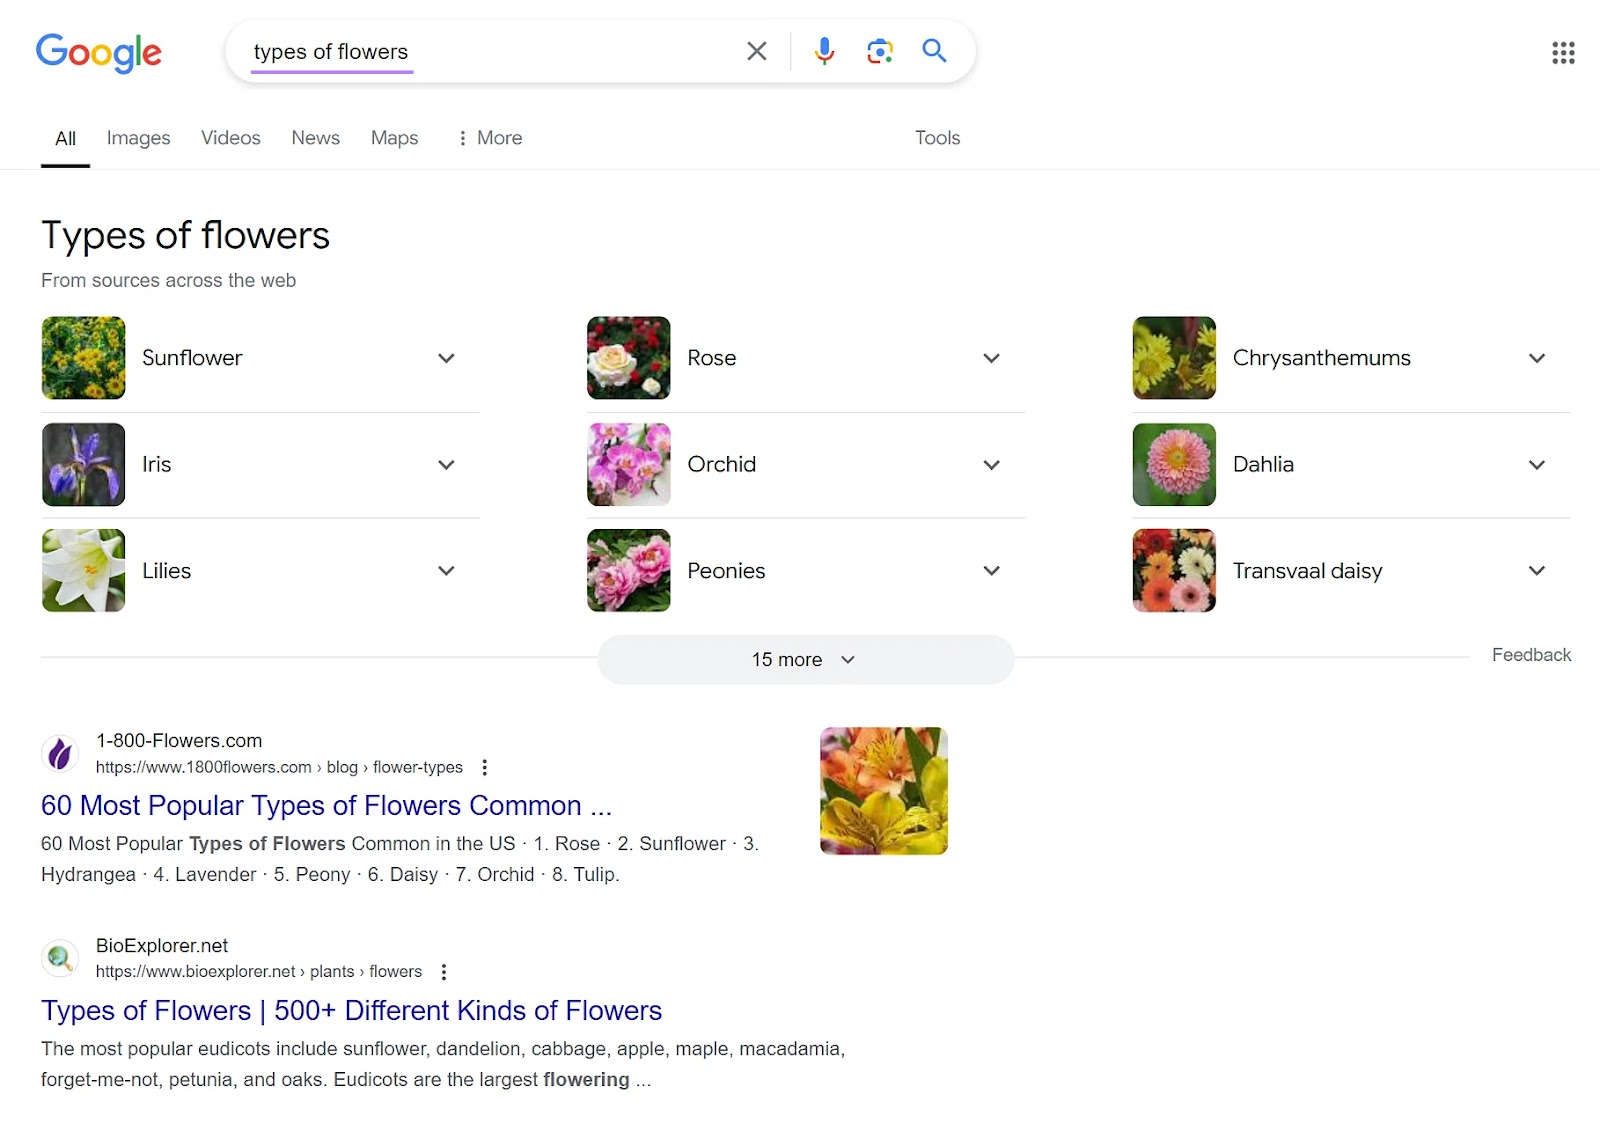 Google Search Engine Results Page for the "types of flowers" keyword showing educational content in the SERP area.